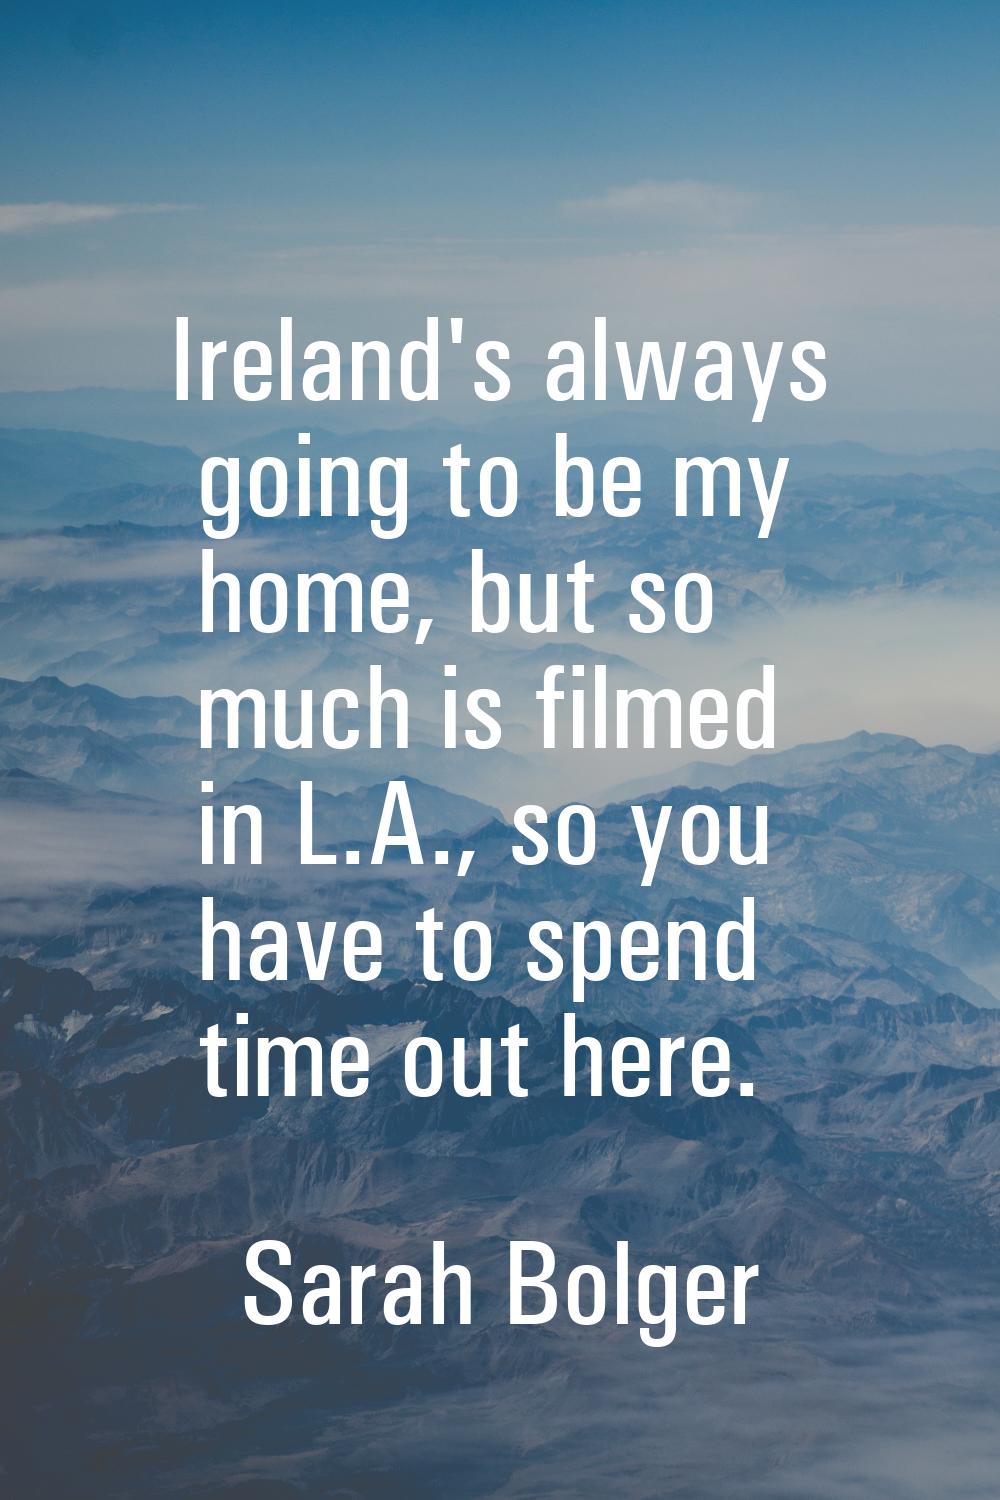 Ireland's always going to be my home, but so much is filmed in L.A., so you have to spend time out 